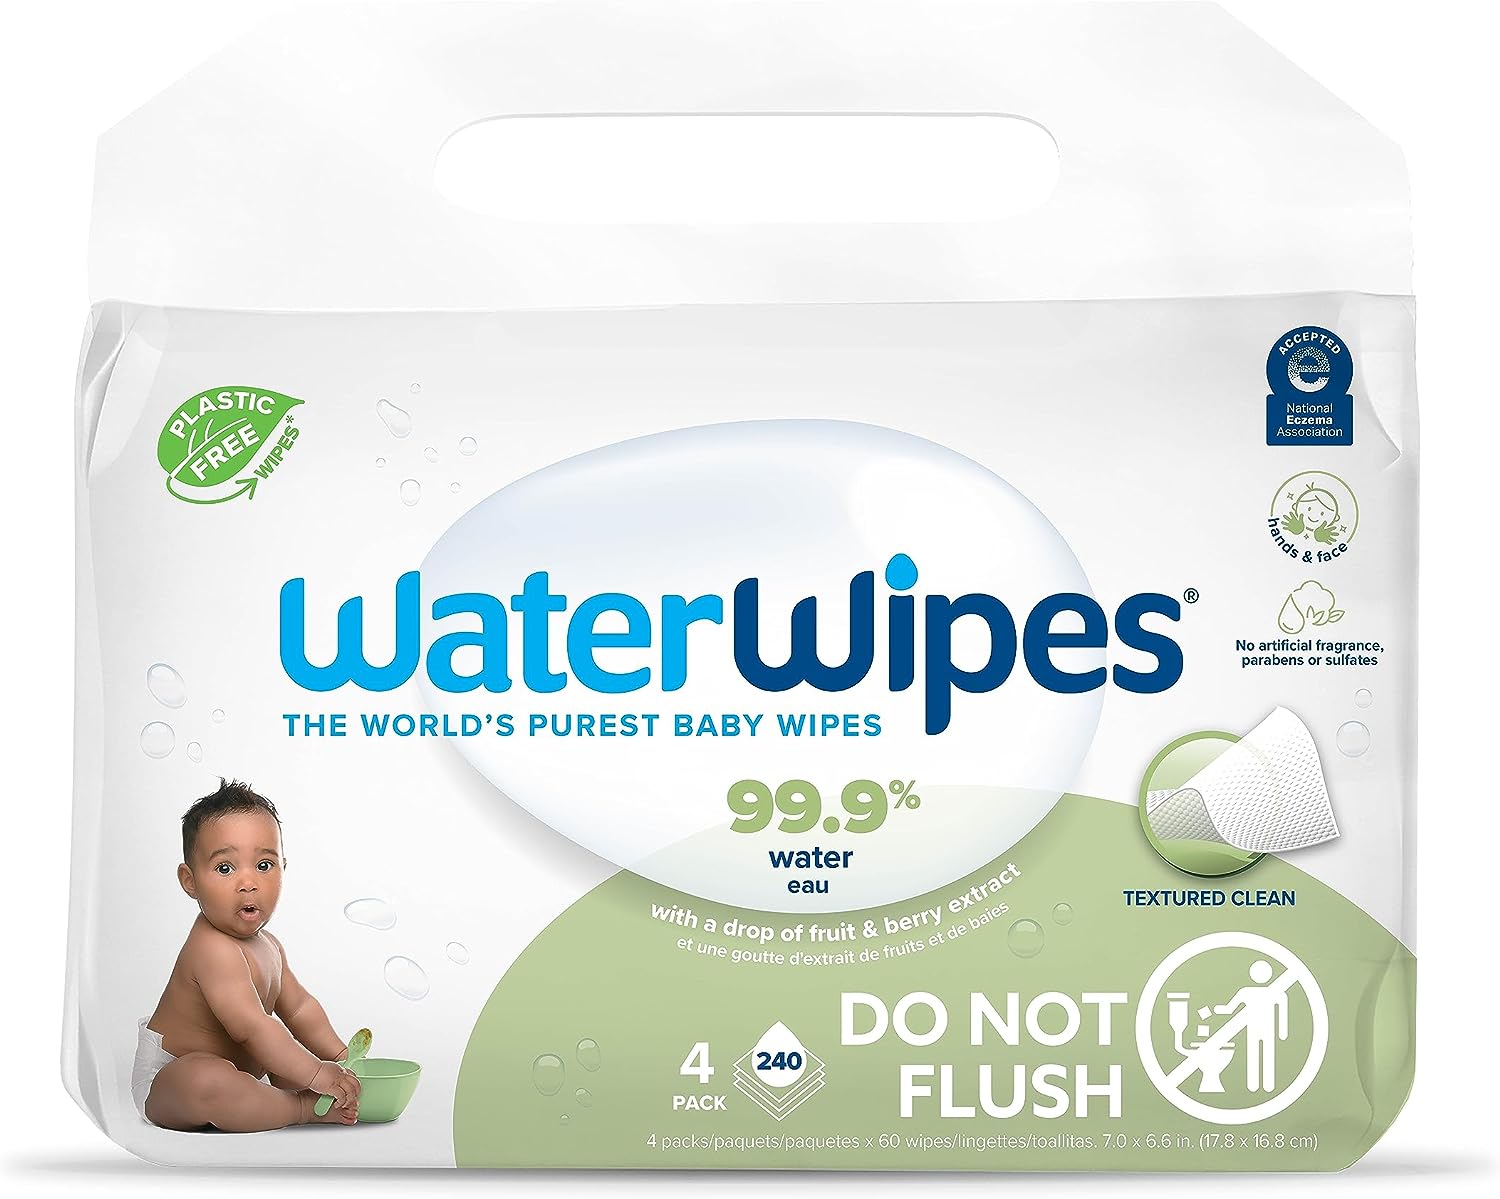 Plastic-Free Textured Clean, Toddler & Baby Wipes